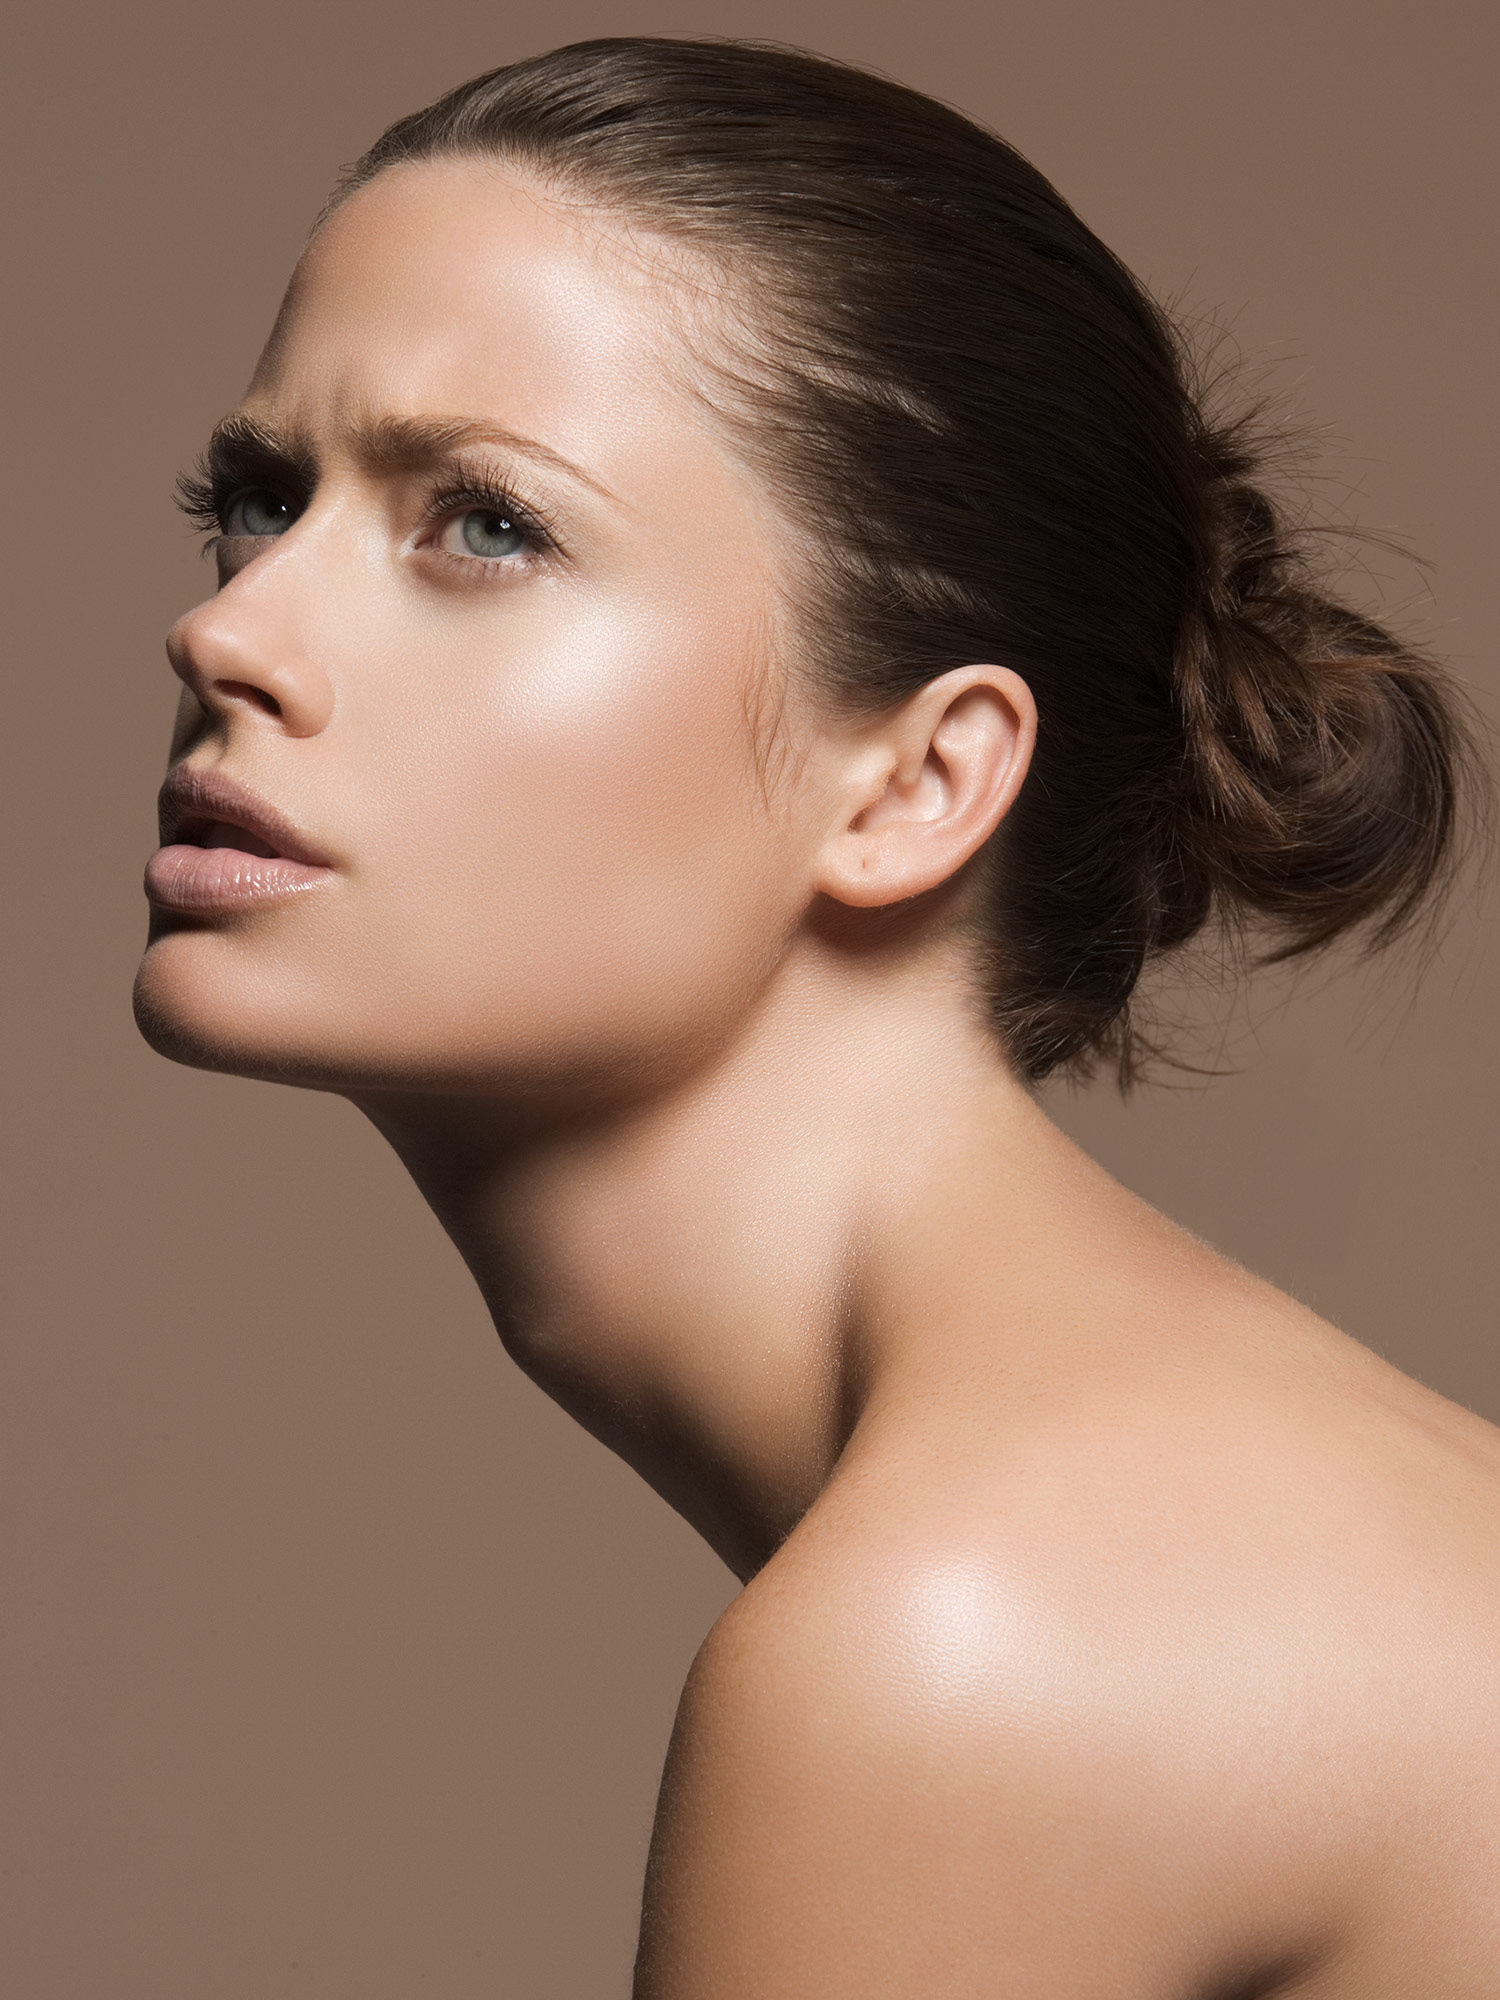 Beauty, Makeup, and Skin Care Photographer, NYC - Zachary Goulko Photography 